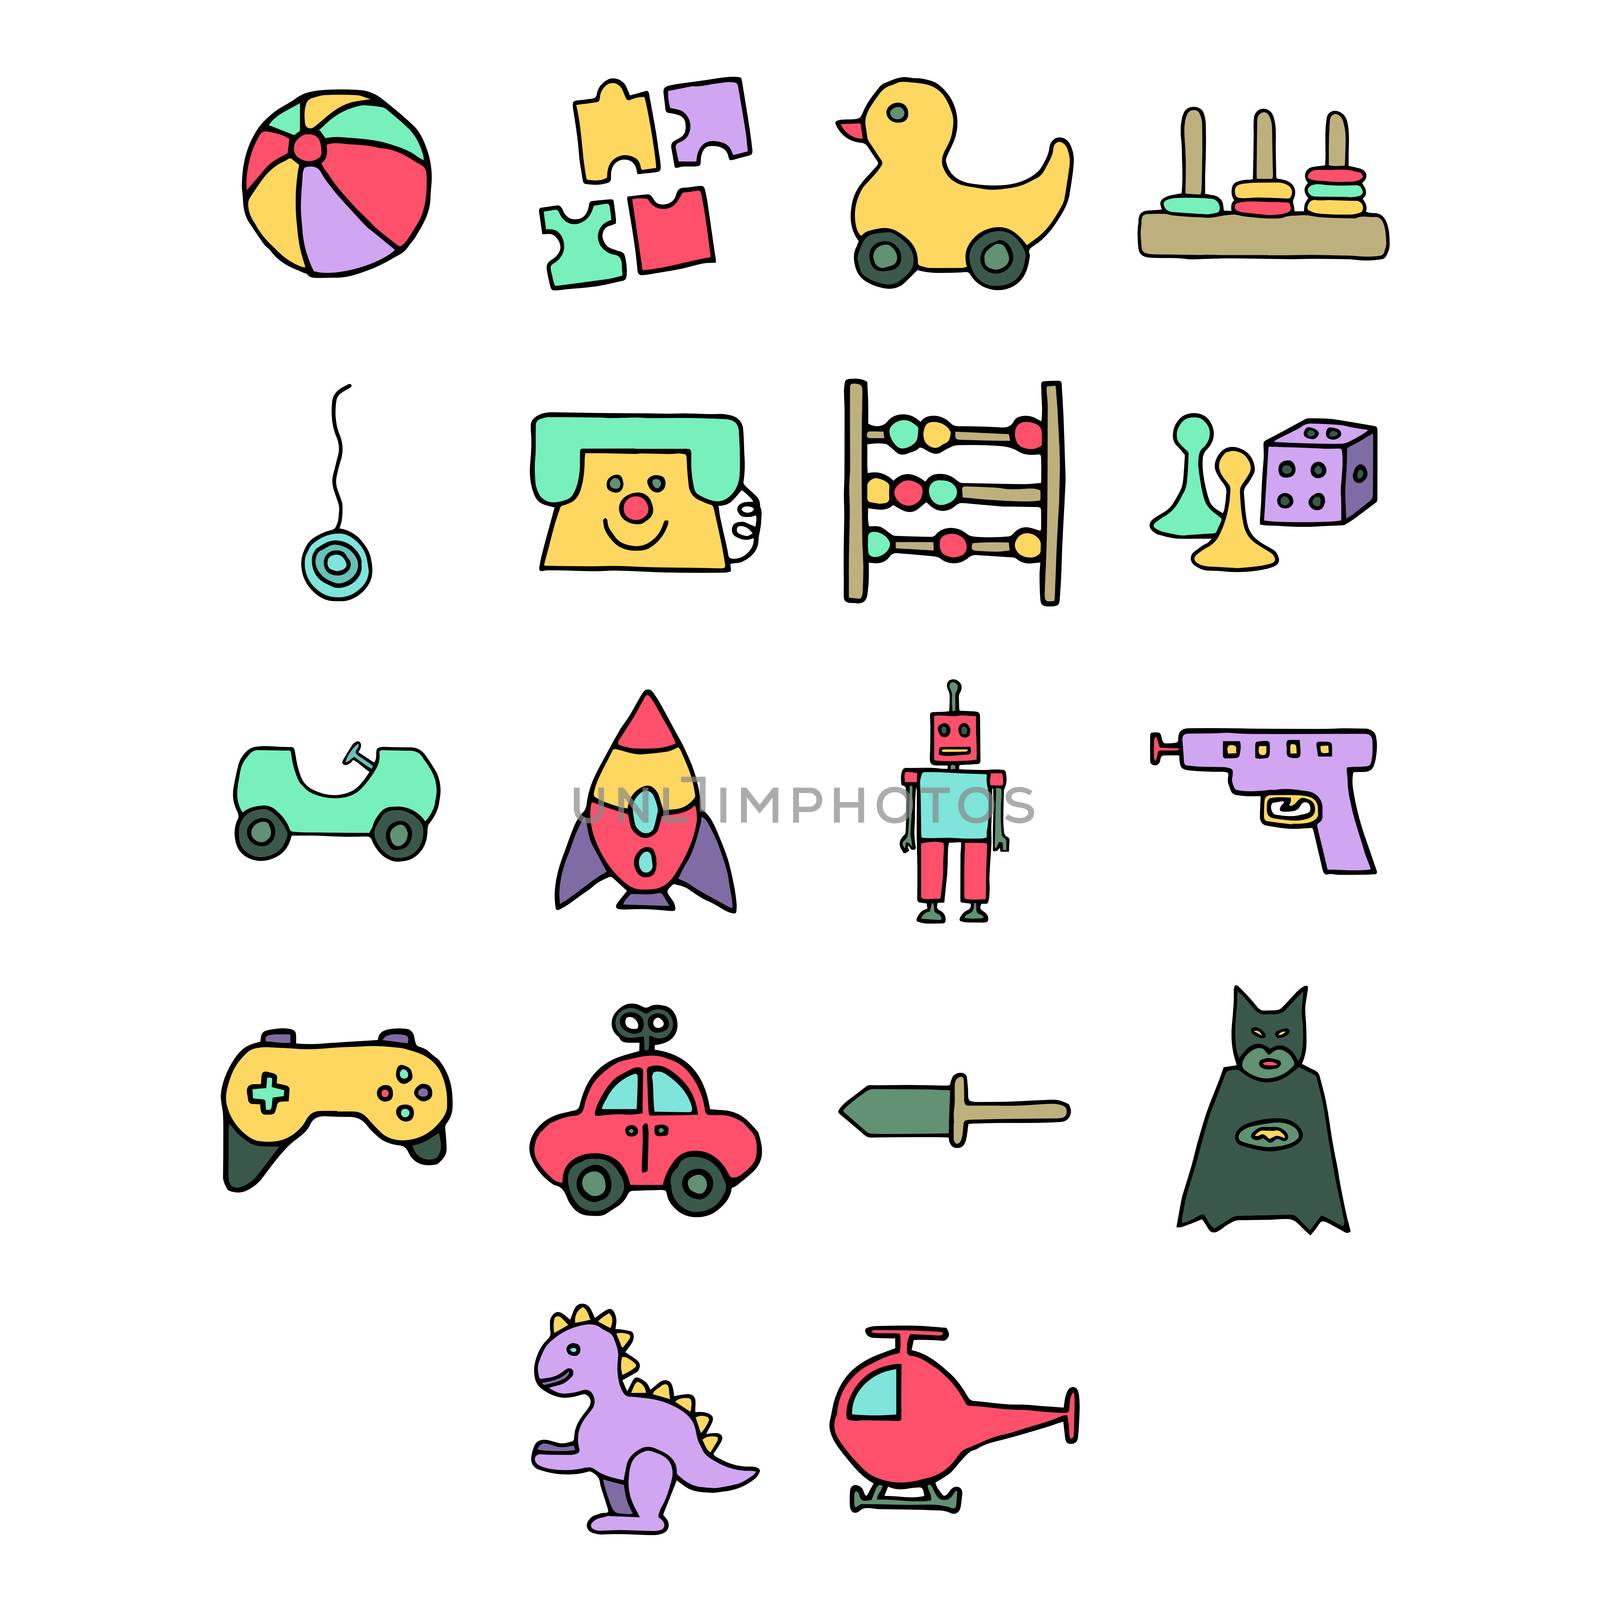 Vectors icons of various toys against white background